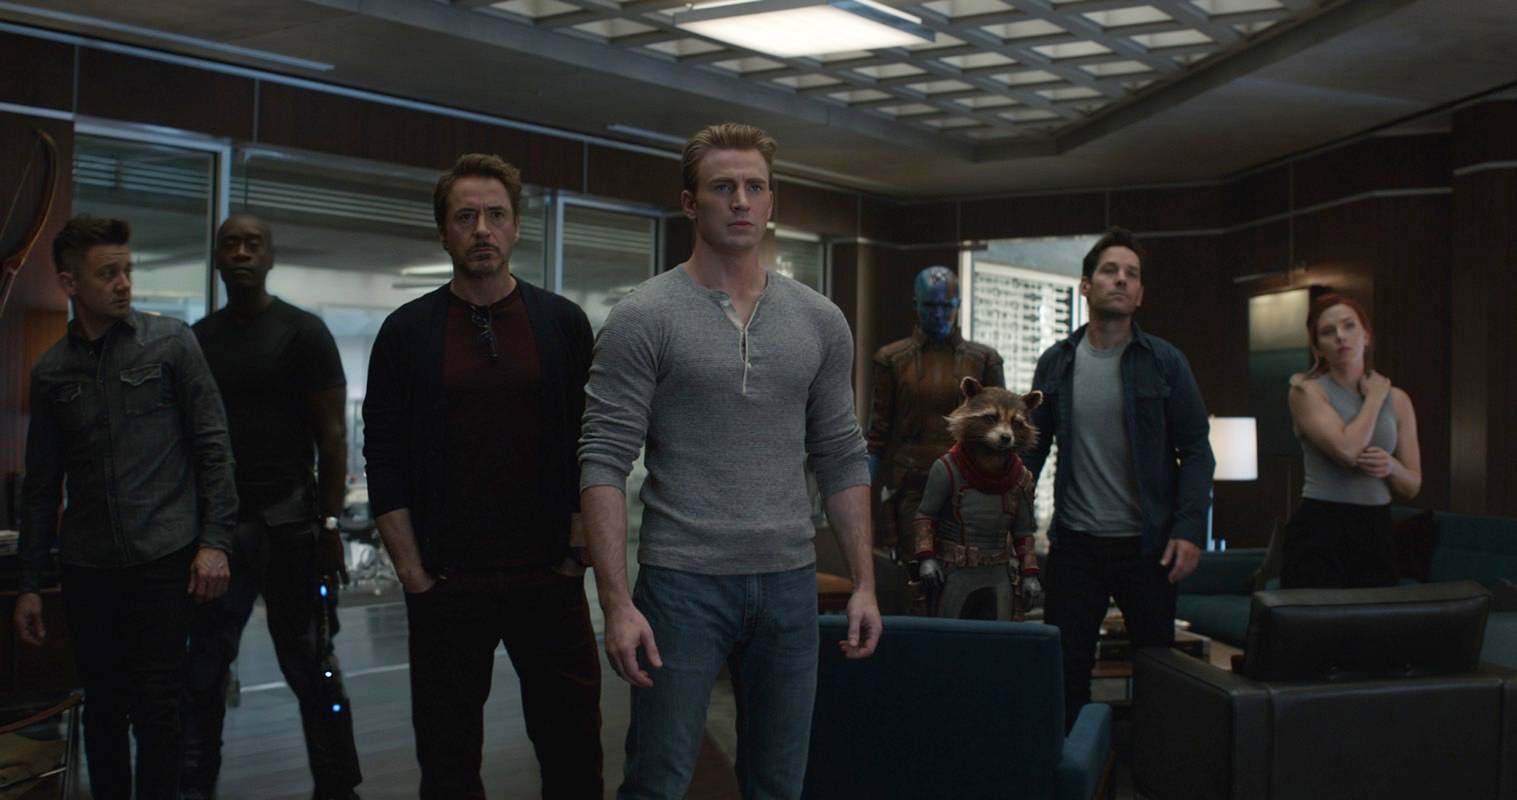 Shall we in the raze know when Marvel’s story ‘Avengers 5’ movie is coming